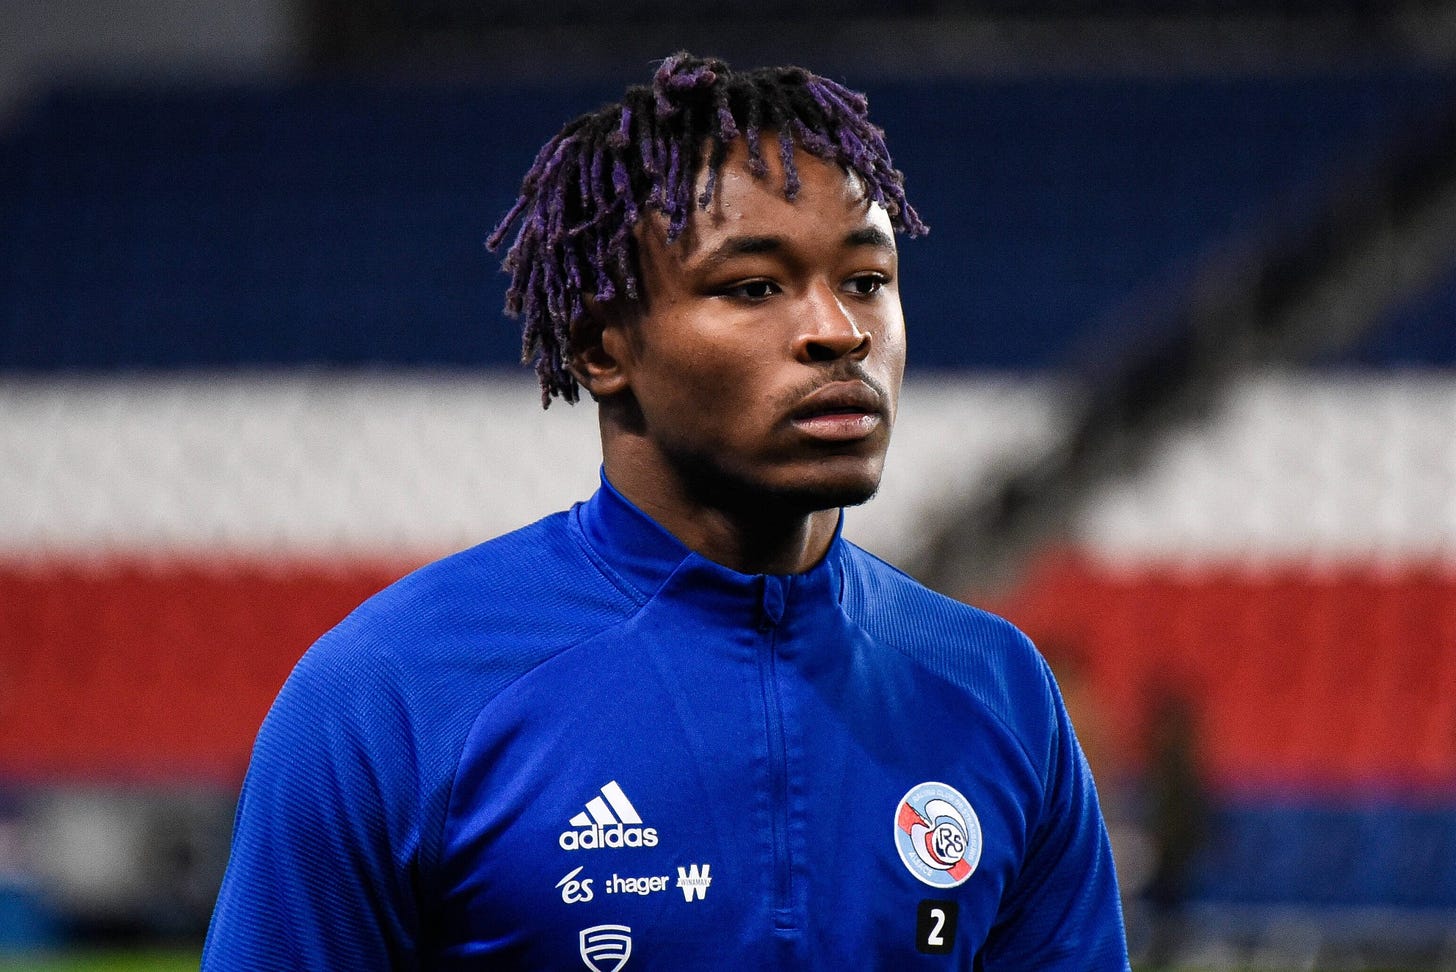 Mohamed Simakan on Christopher Nkunku: “He gives good advice, he's one of  the oldest here and plays a leadership role” – Get French Football News